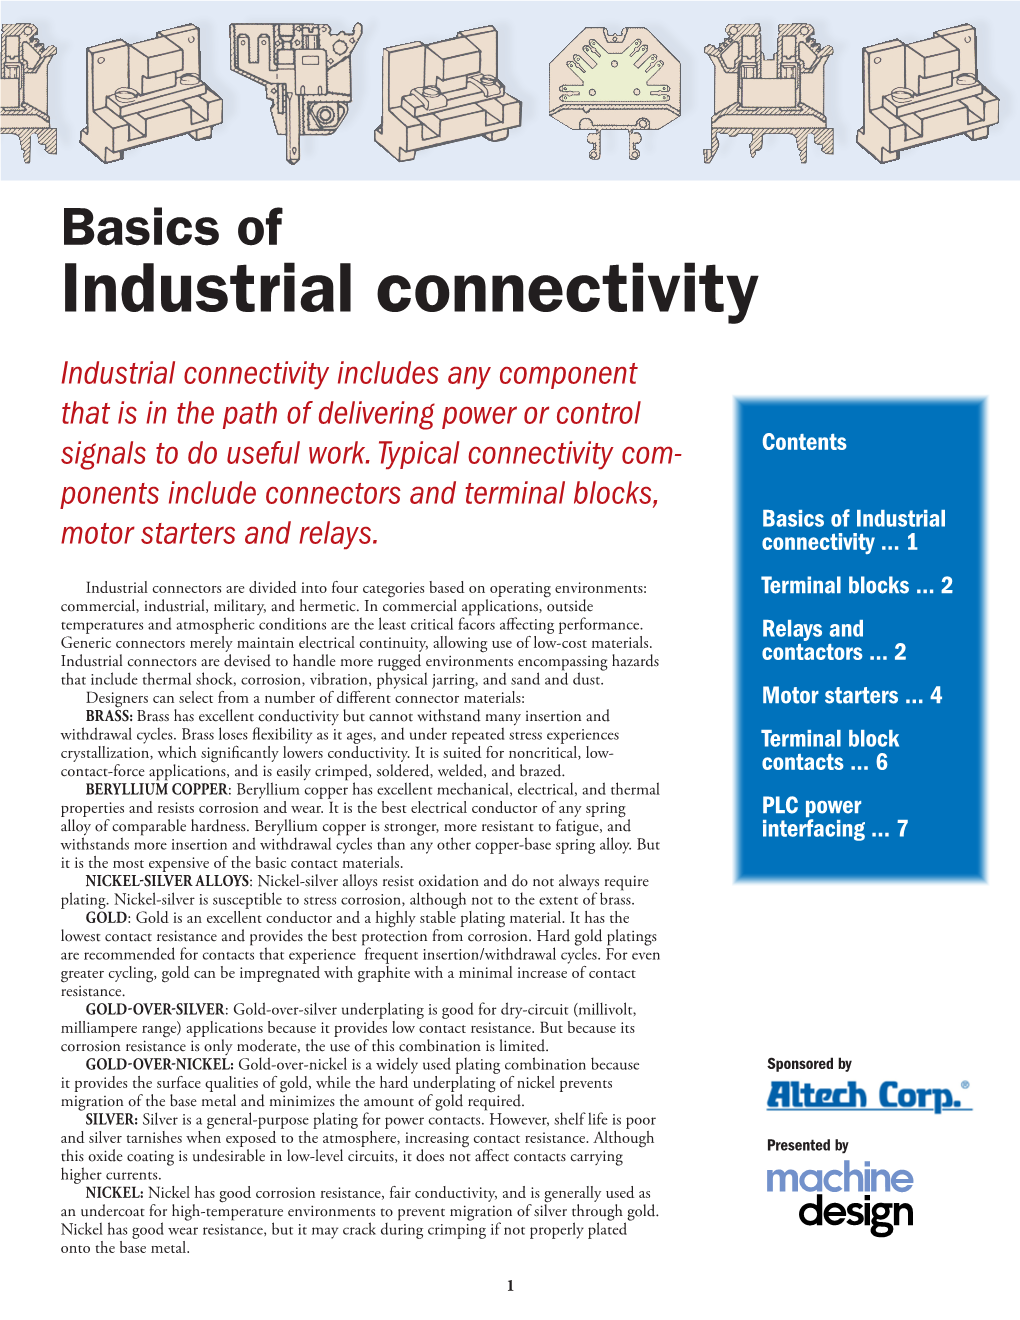 Basics of Industrial Connectivity Industrial Connectivity Includes Any Component That Is in the Path of Delivering Power Or Control Signals to Do Useful Work